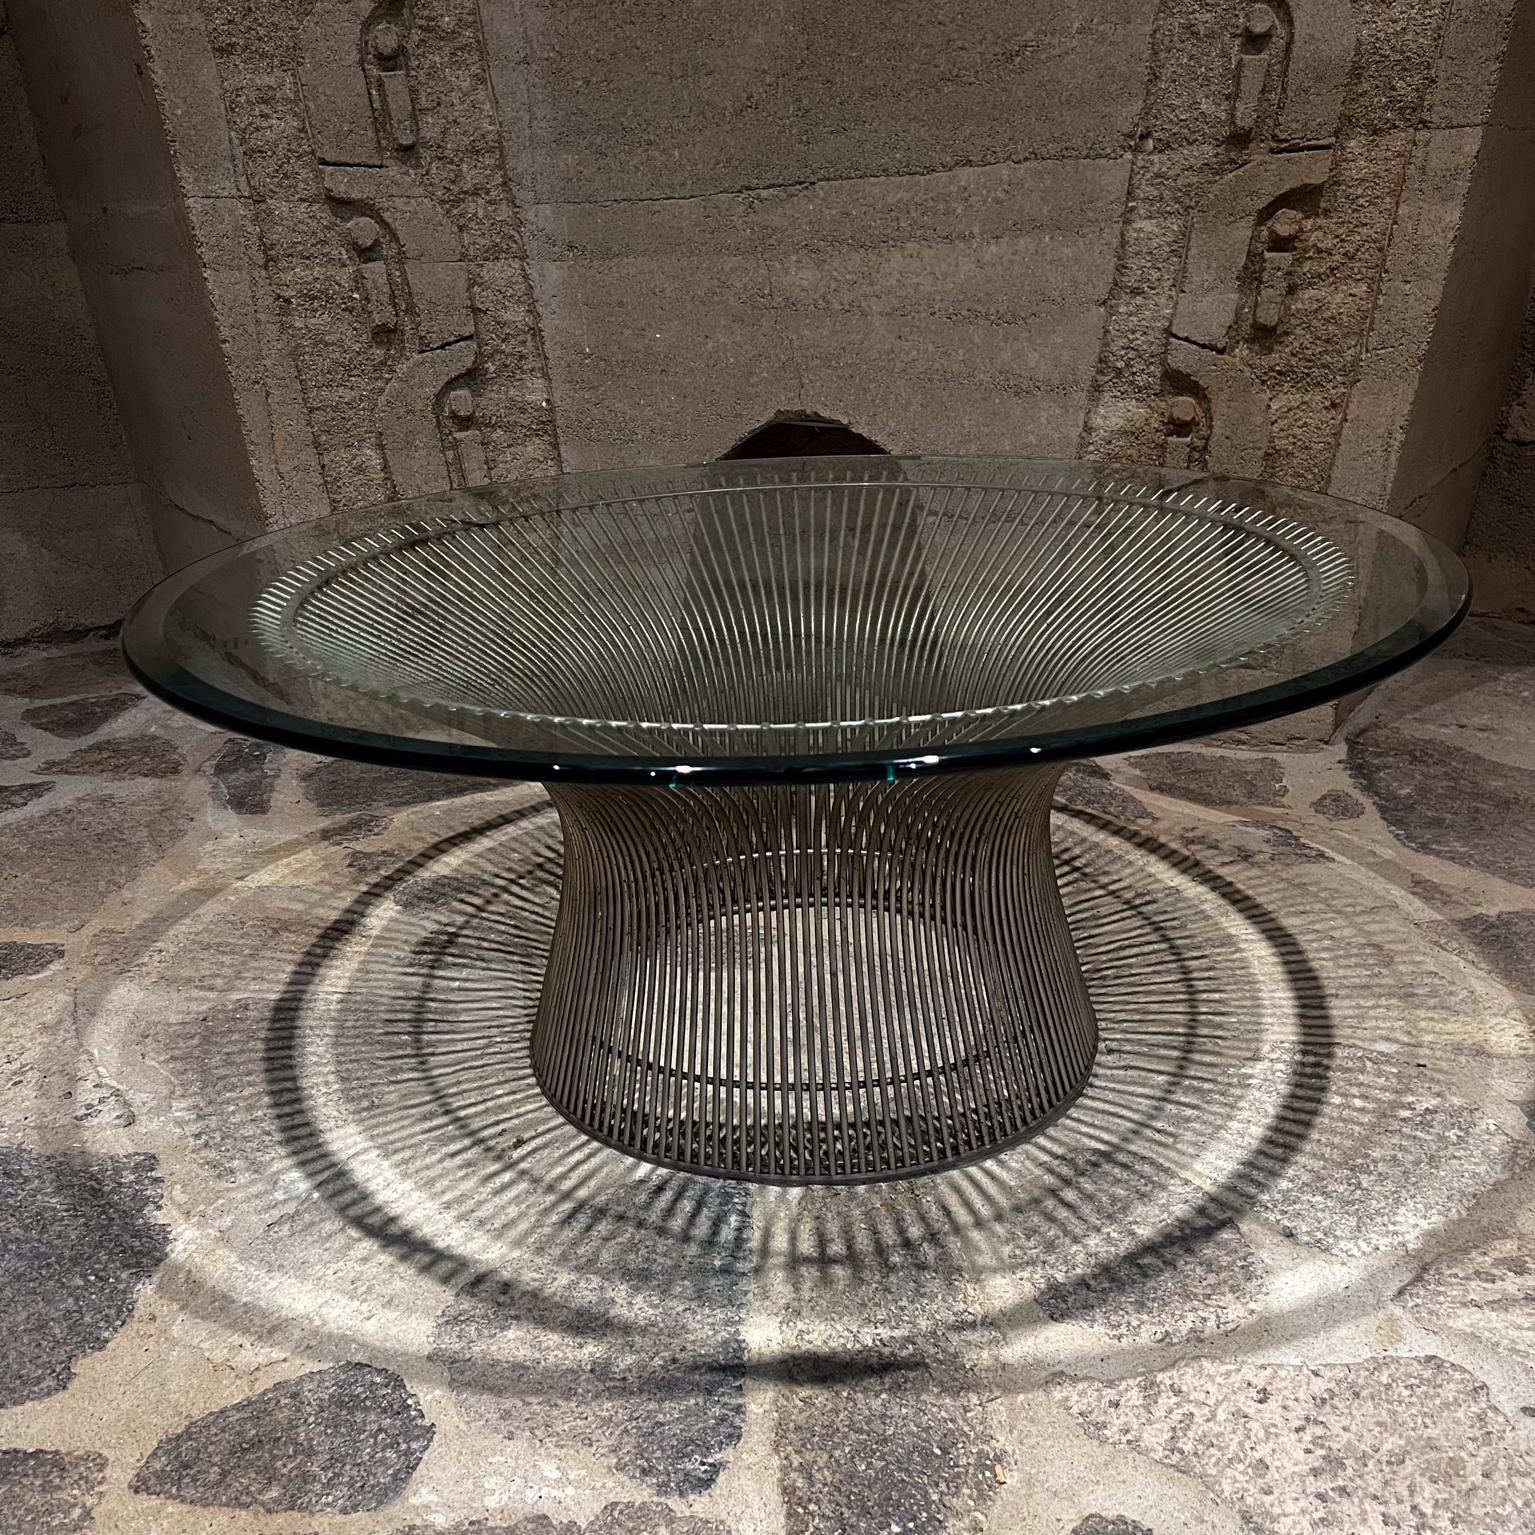 1970s Warren Platner Elegant Modern Round Coffee Table
Designed with metal wire and glass top.
Unmarked, attribution Warren Platner.
15.5 h with glass, glass 36 diameter x .5 thick Base 29 diameter
Preowned original vintage unrestored